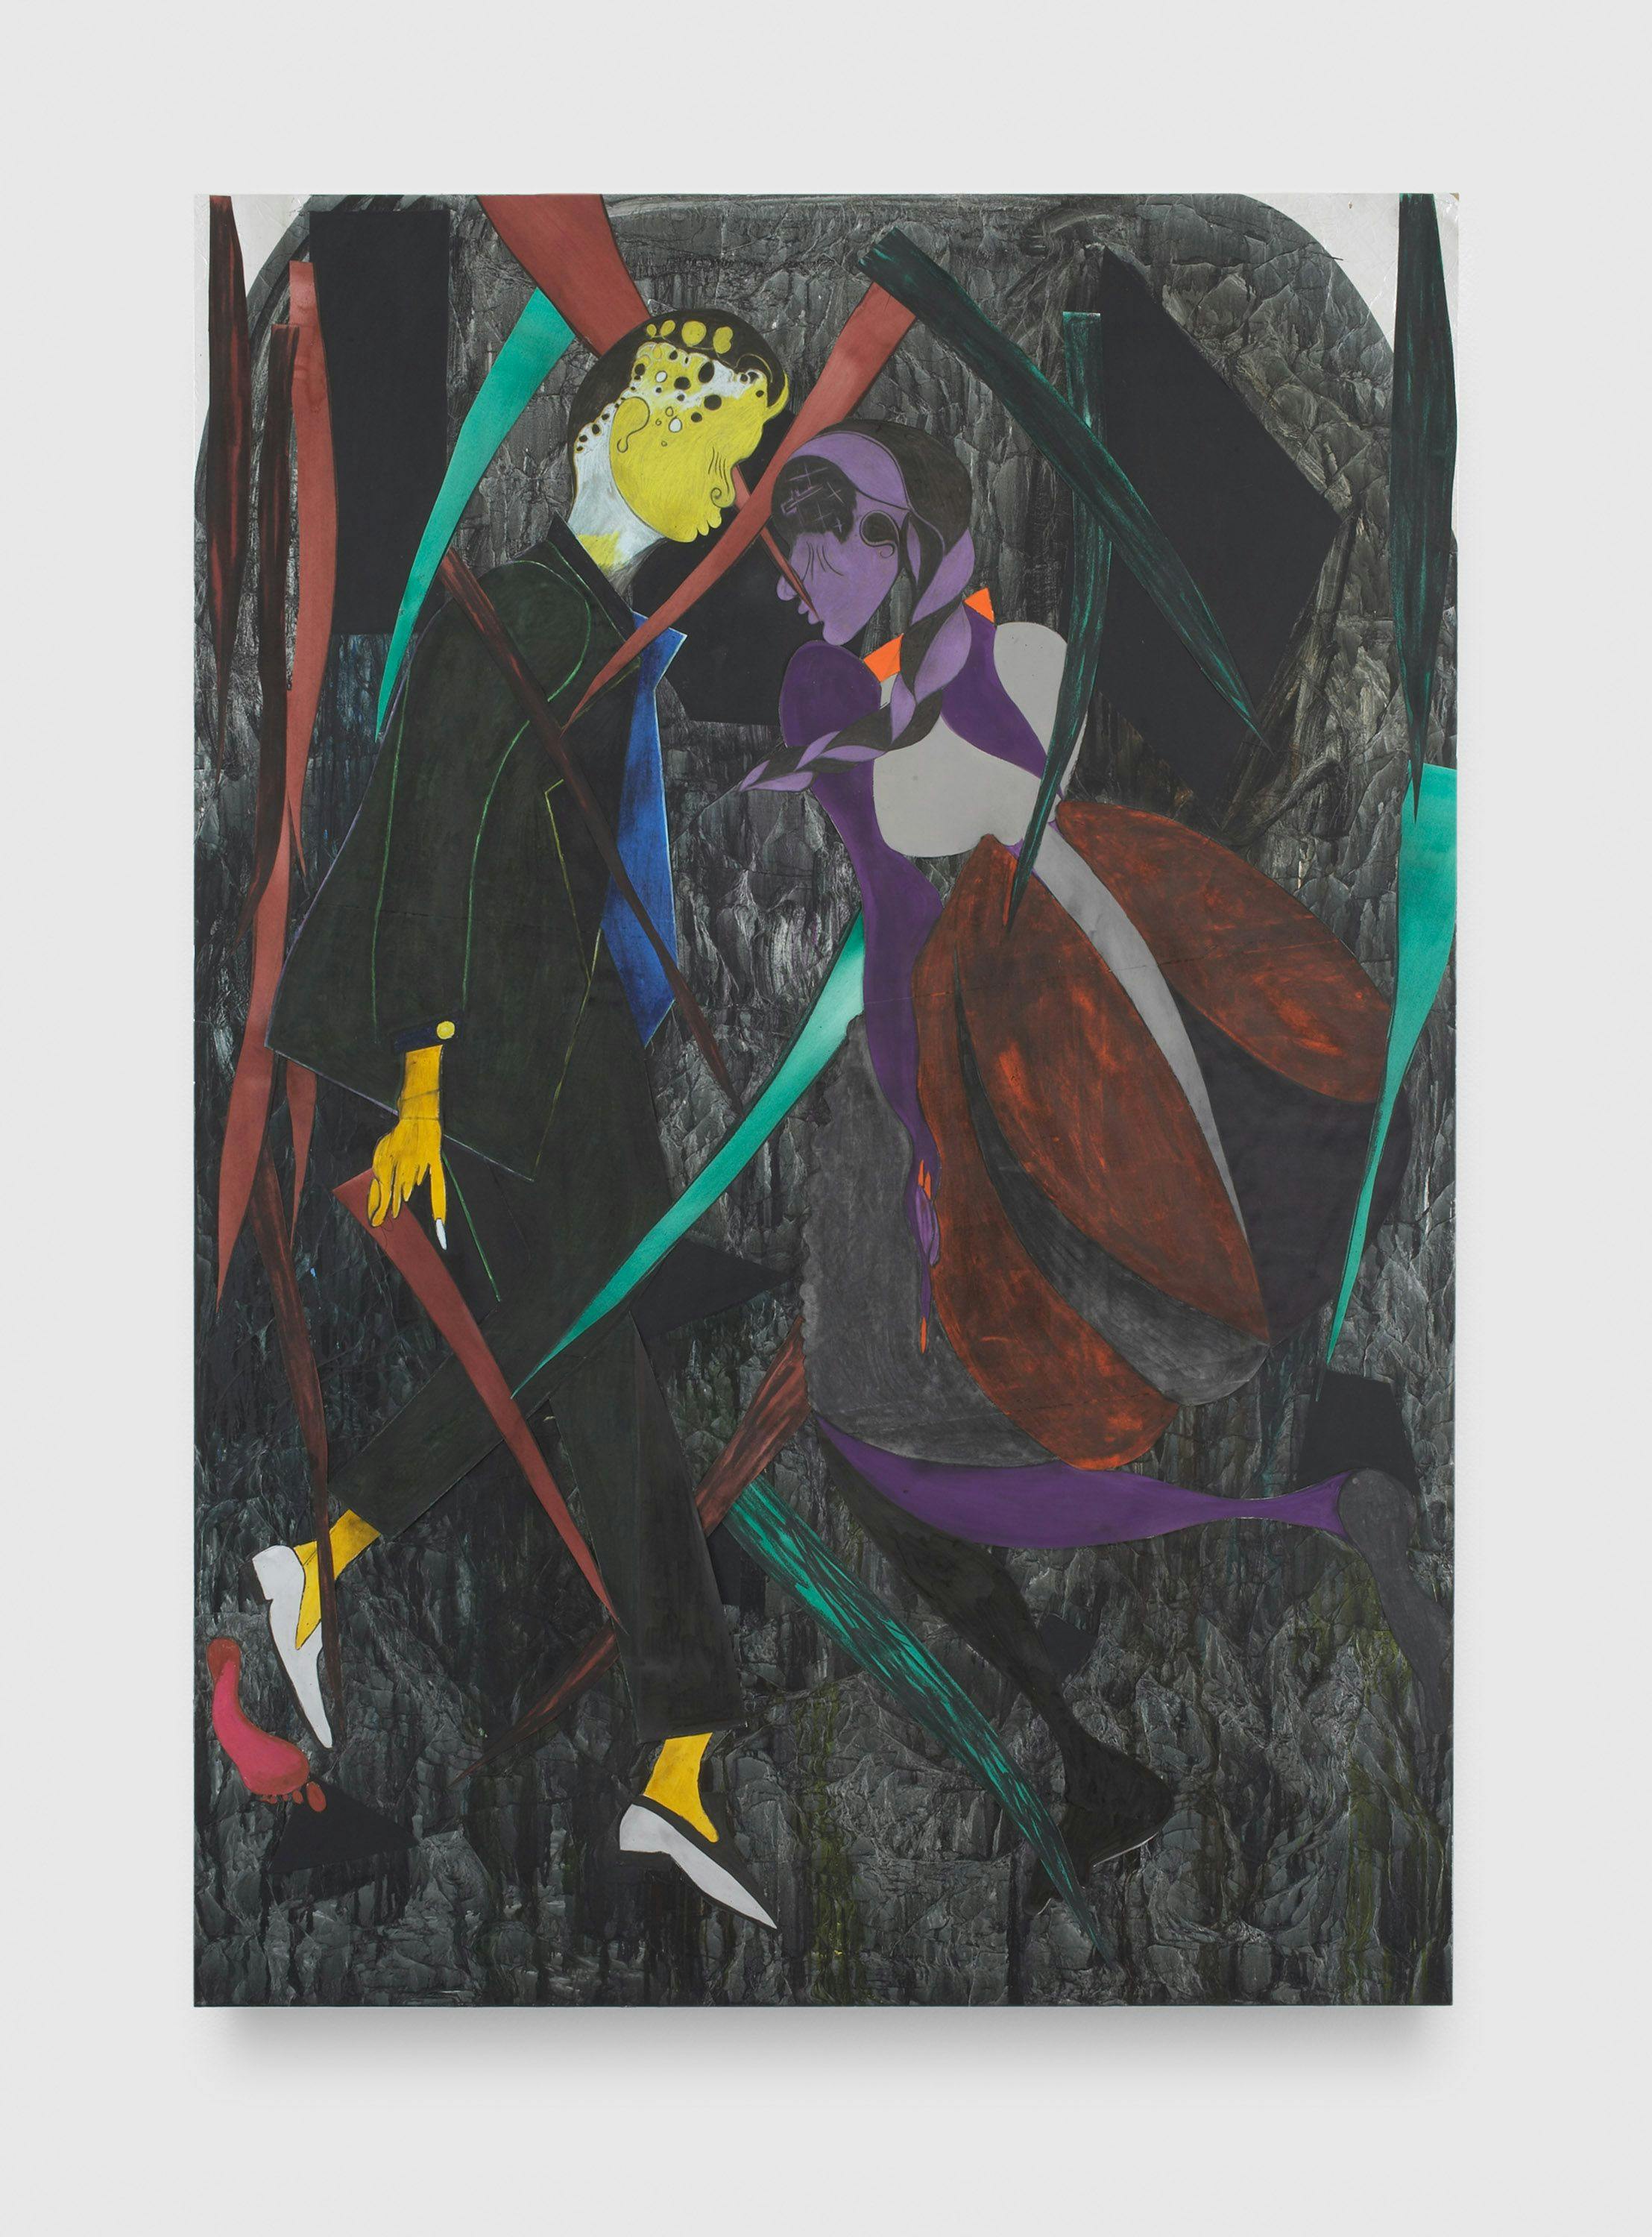 A mixed media artwork by Chris Ofili, titled Christmas Eve (Palms), dated 2007.